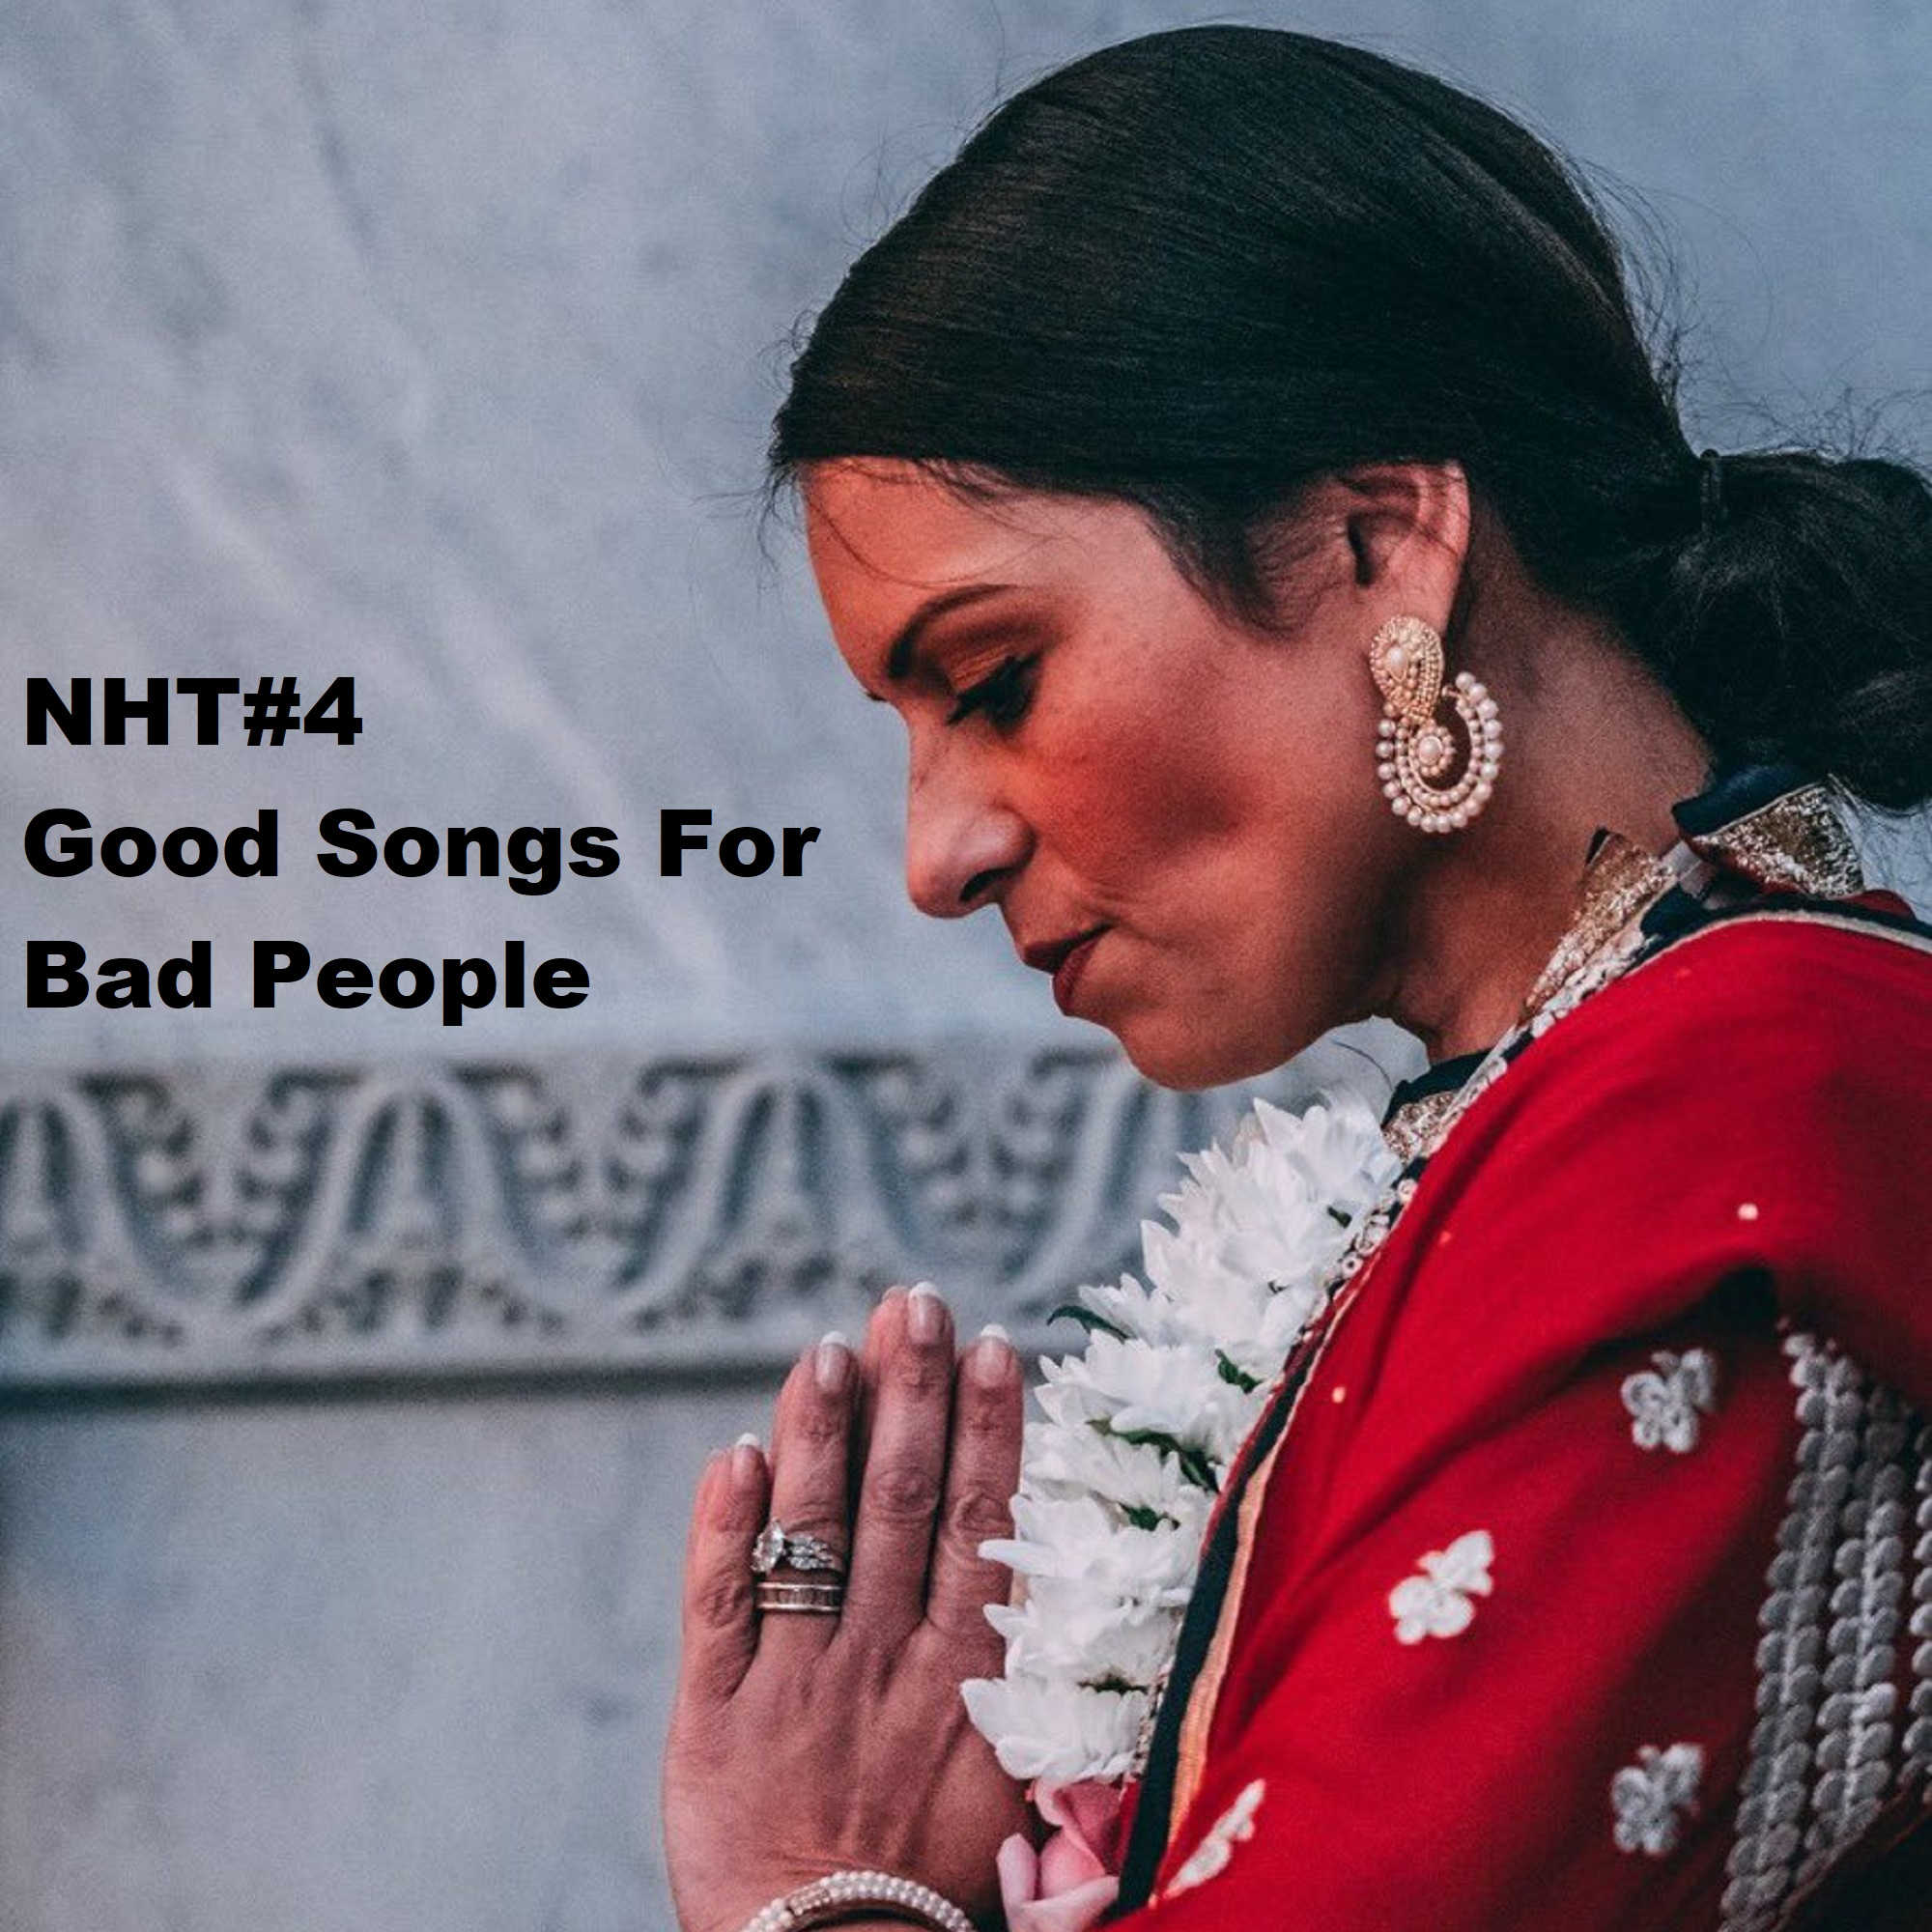 NHT#4 ... Good Songs For Bad People....